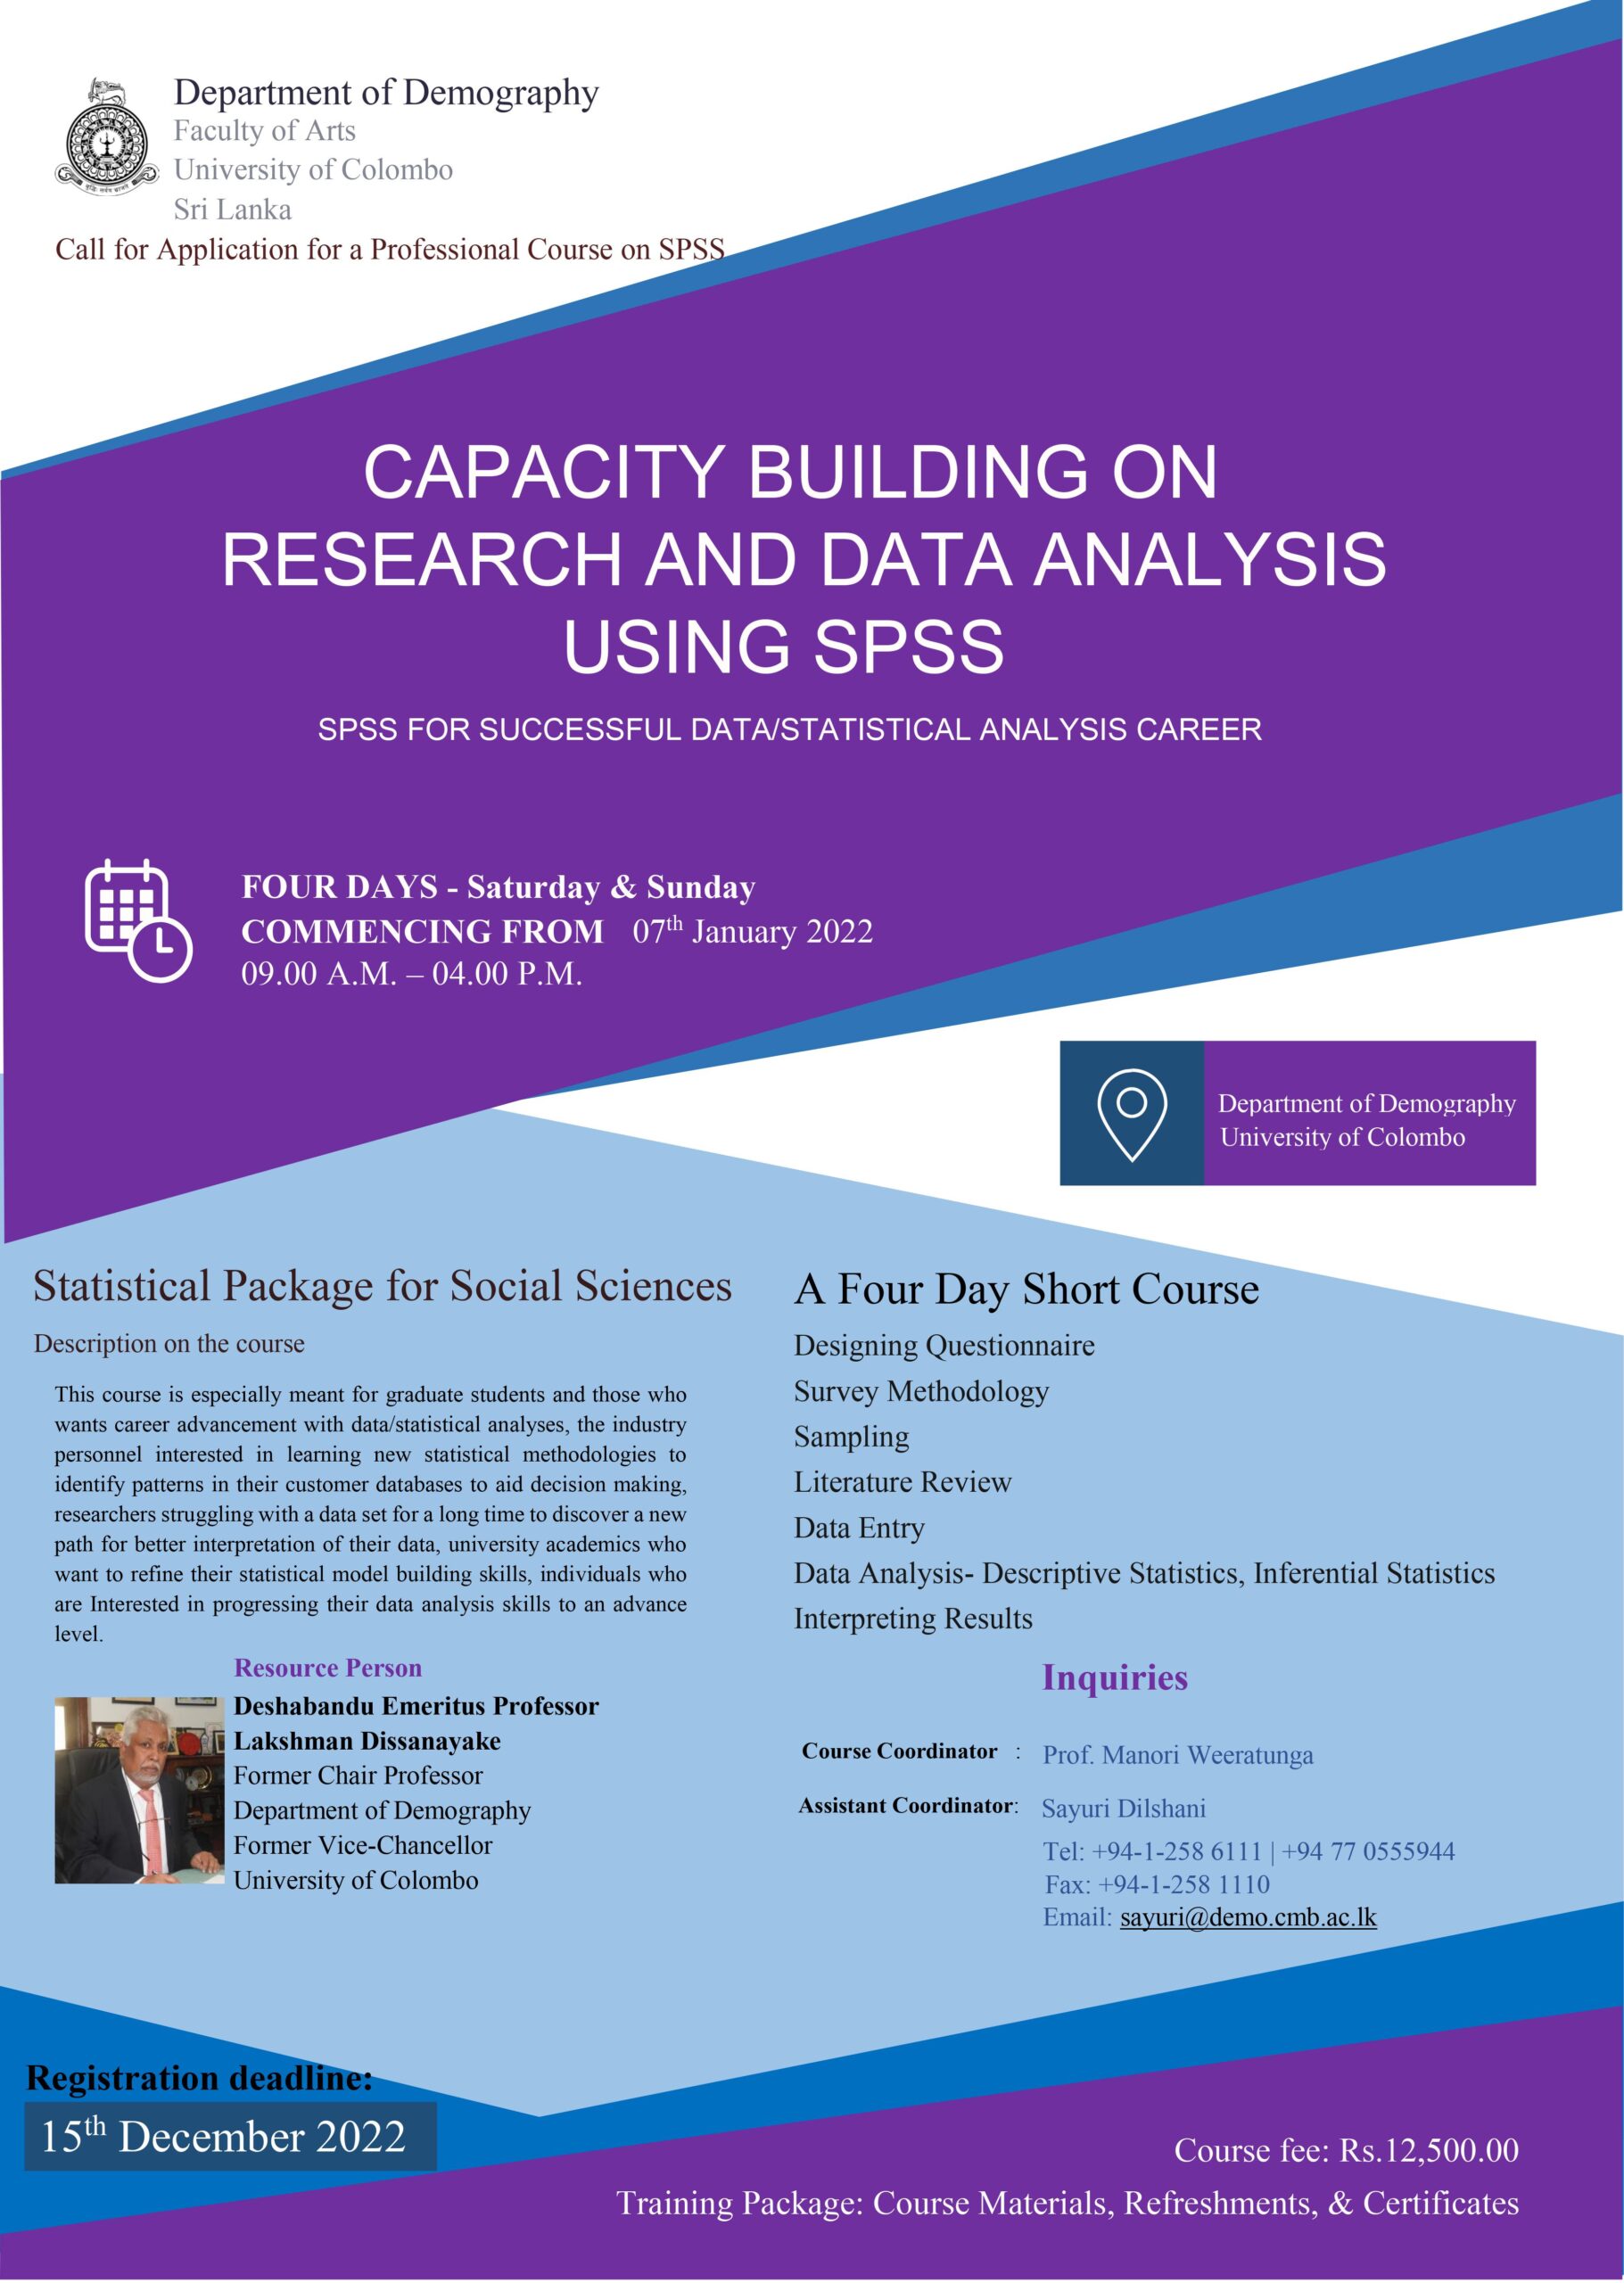 Professional Course on Capacity Building on Research and Data Analysis using SPSS